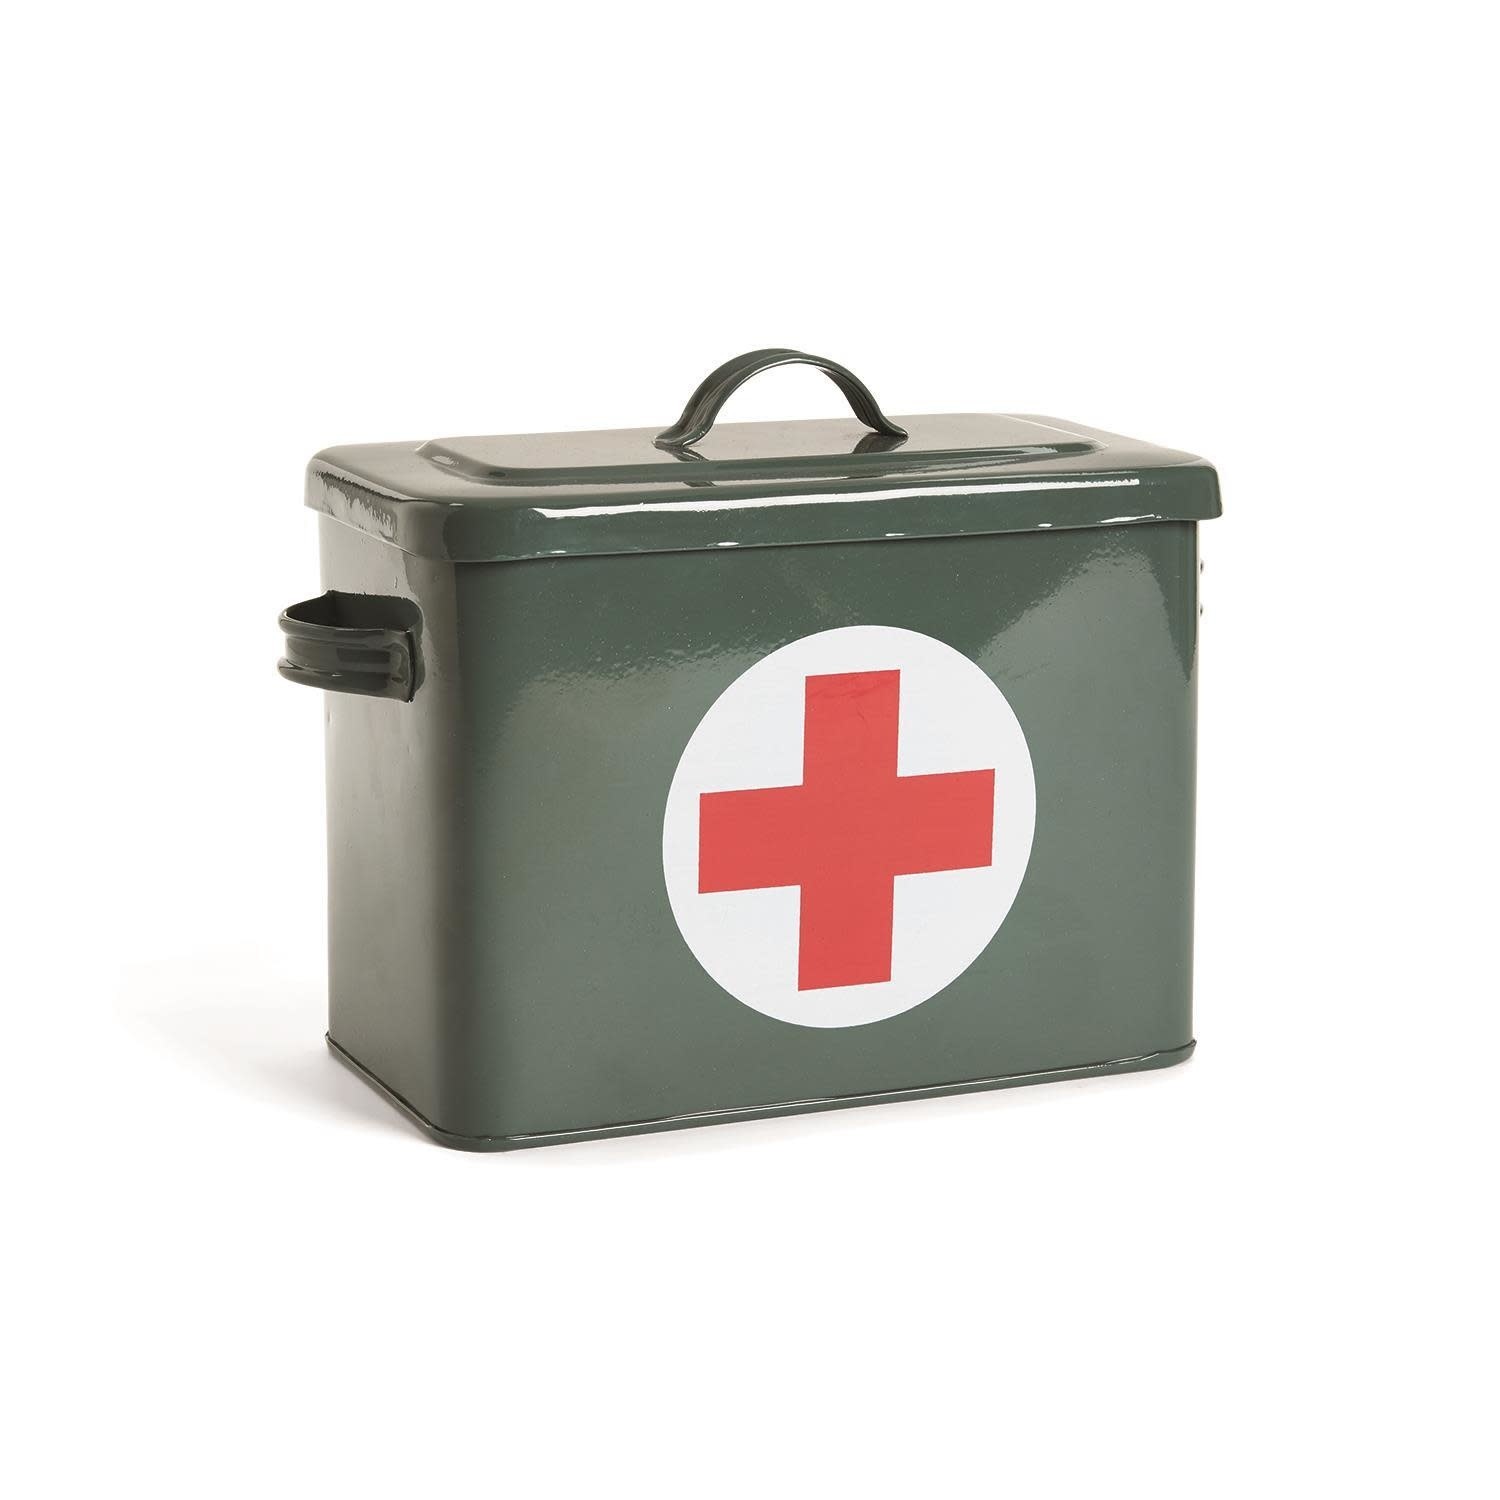 Steel First Aid Storage Box with 3 Section Organizer Tray Insert - Gre -  CAPERS Home